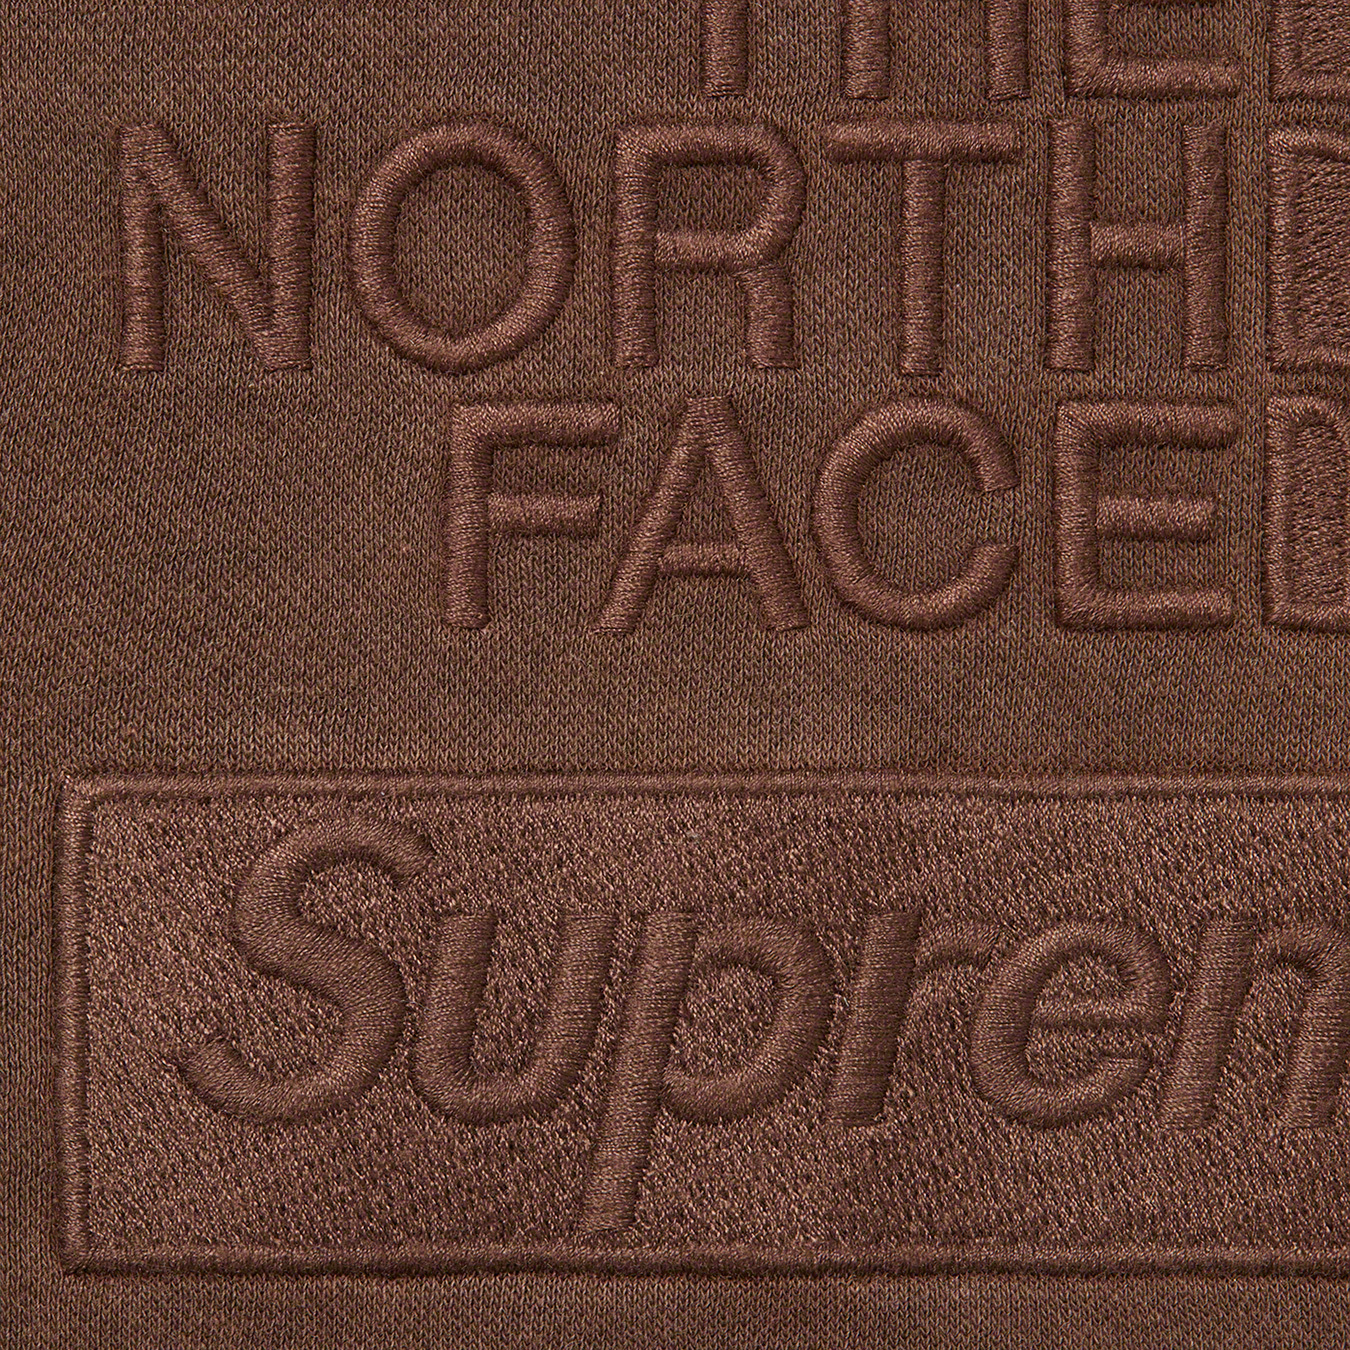 Supreme The North Face Pigment Printed Hooded Sweatshirt Brown – EDS Store